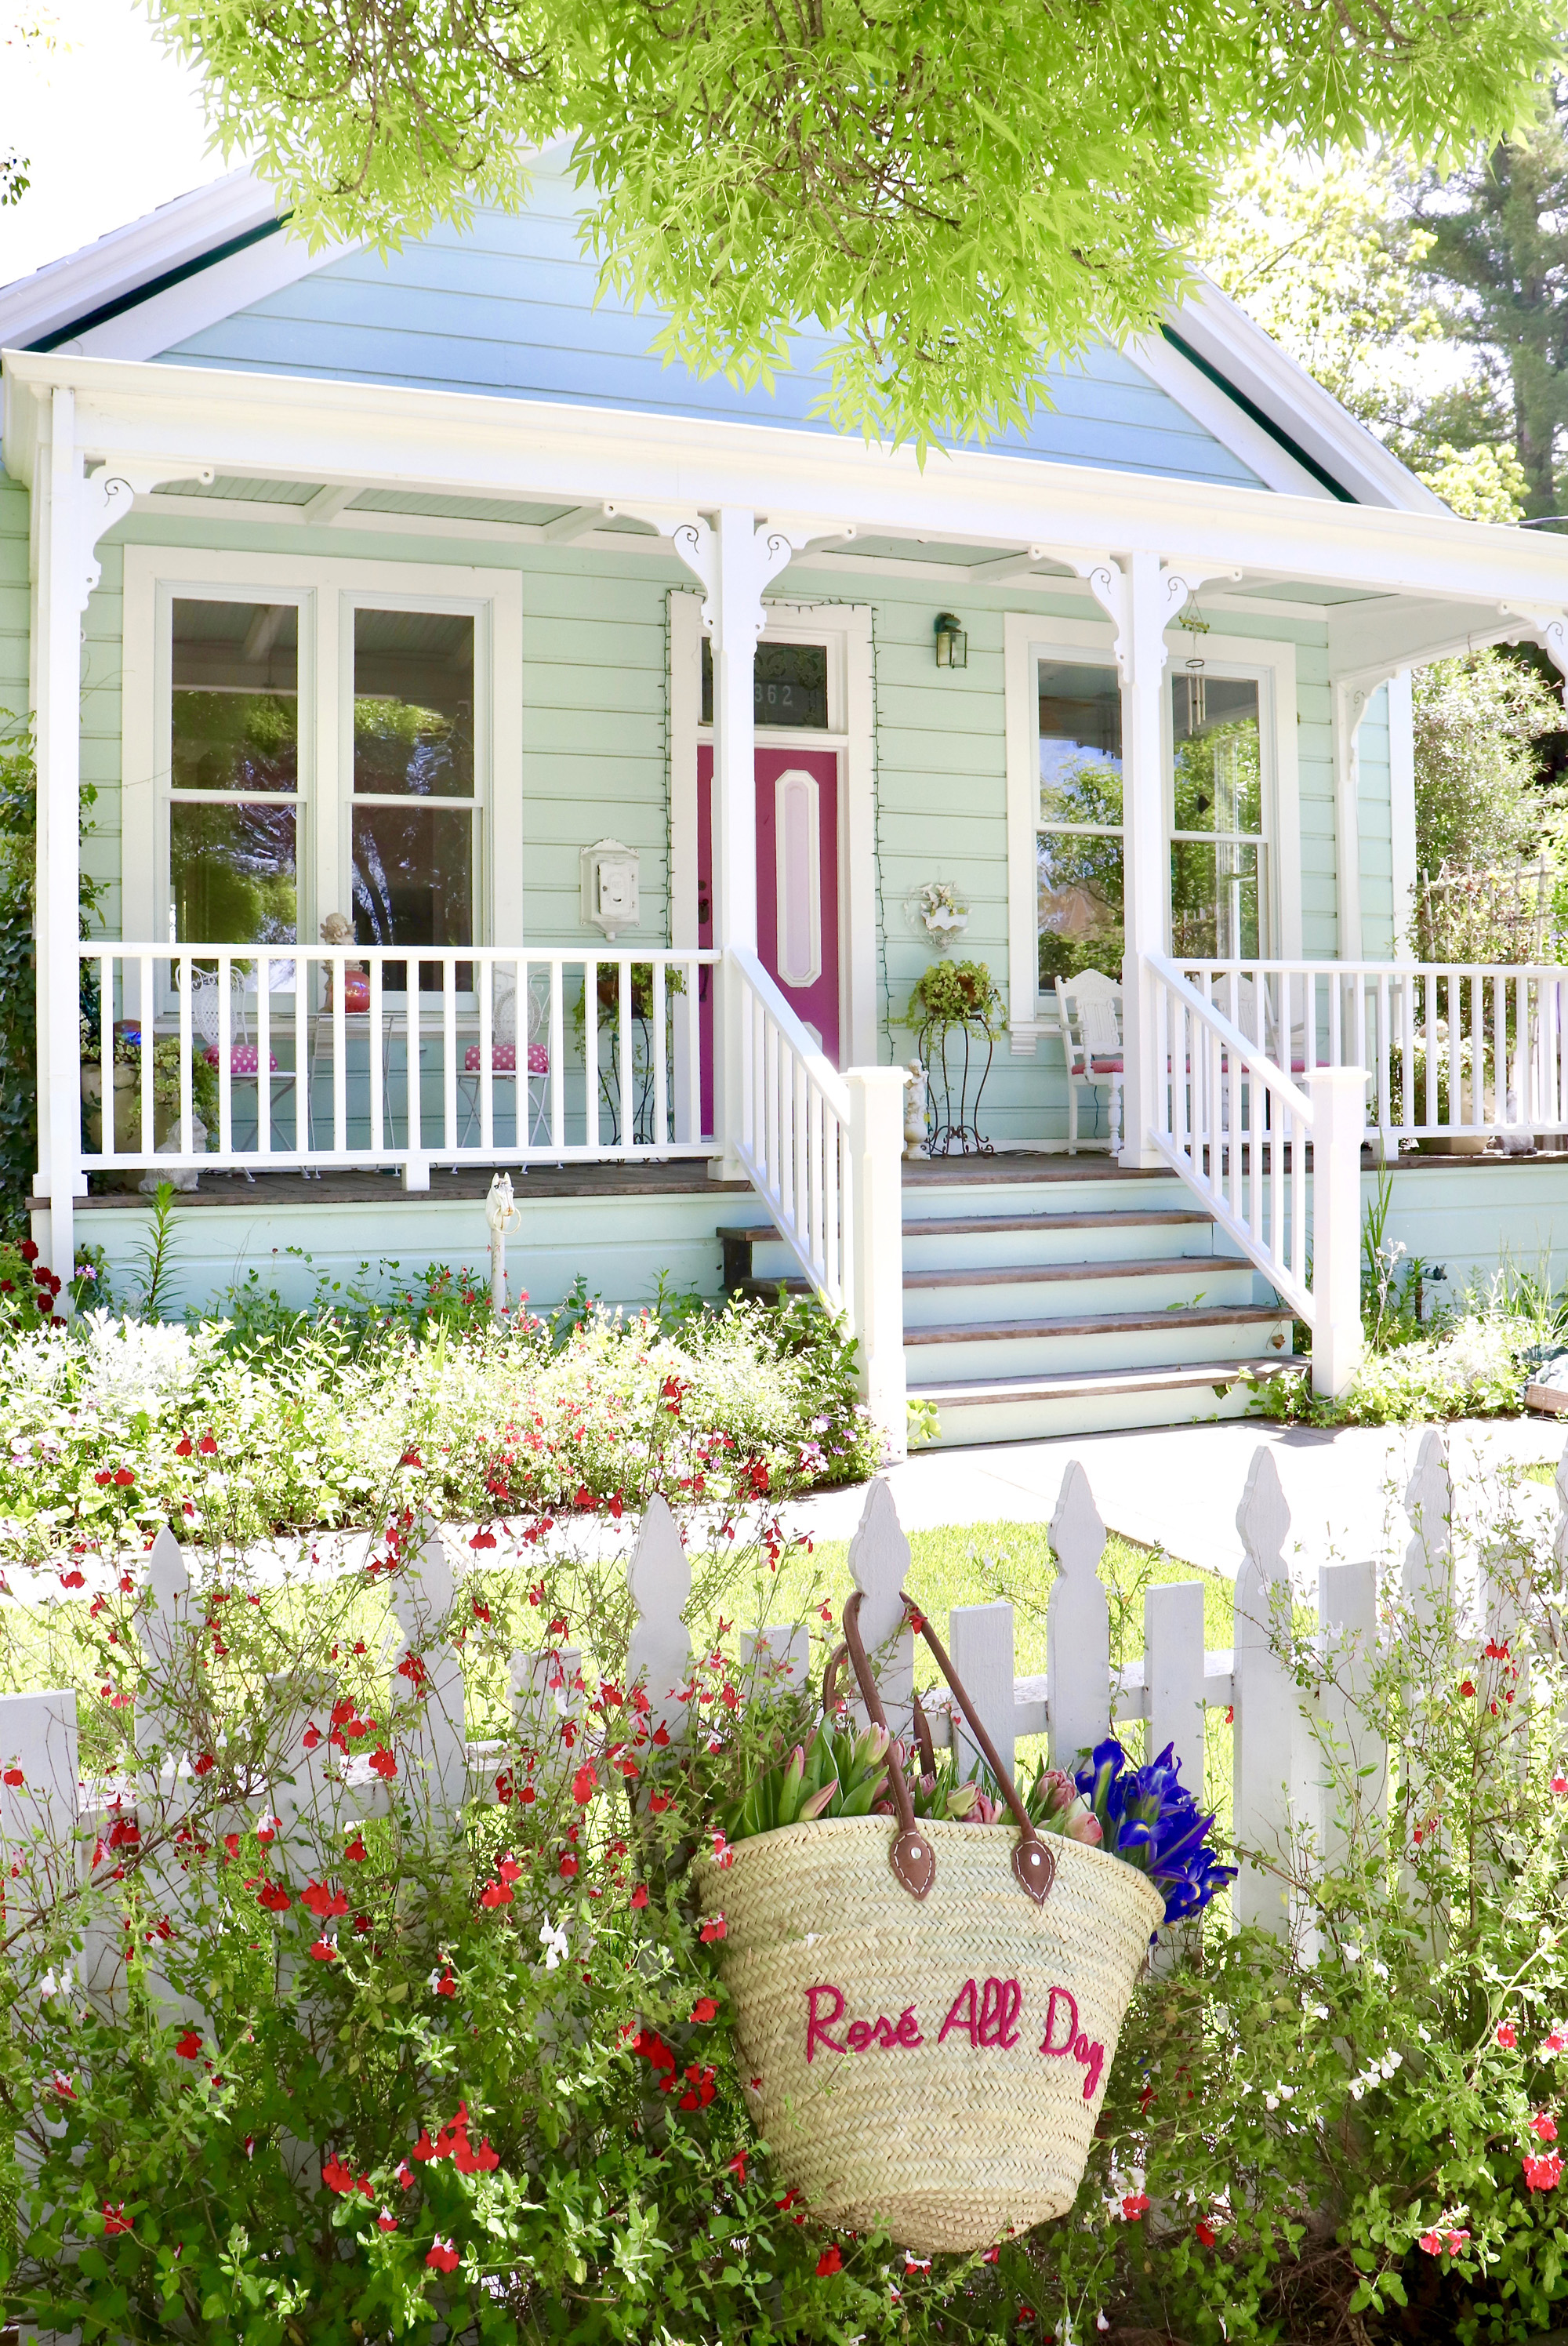 Cottages, Florals, and Sunshine - Oh My!